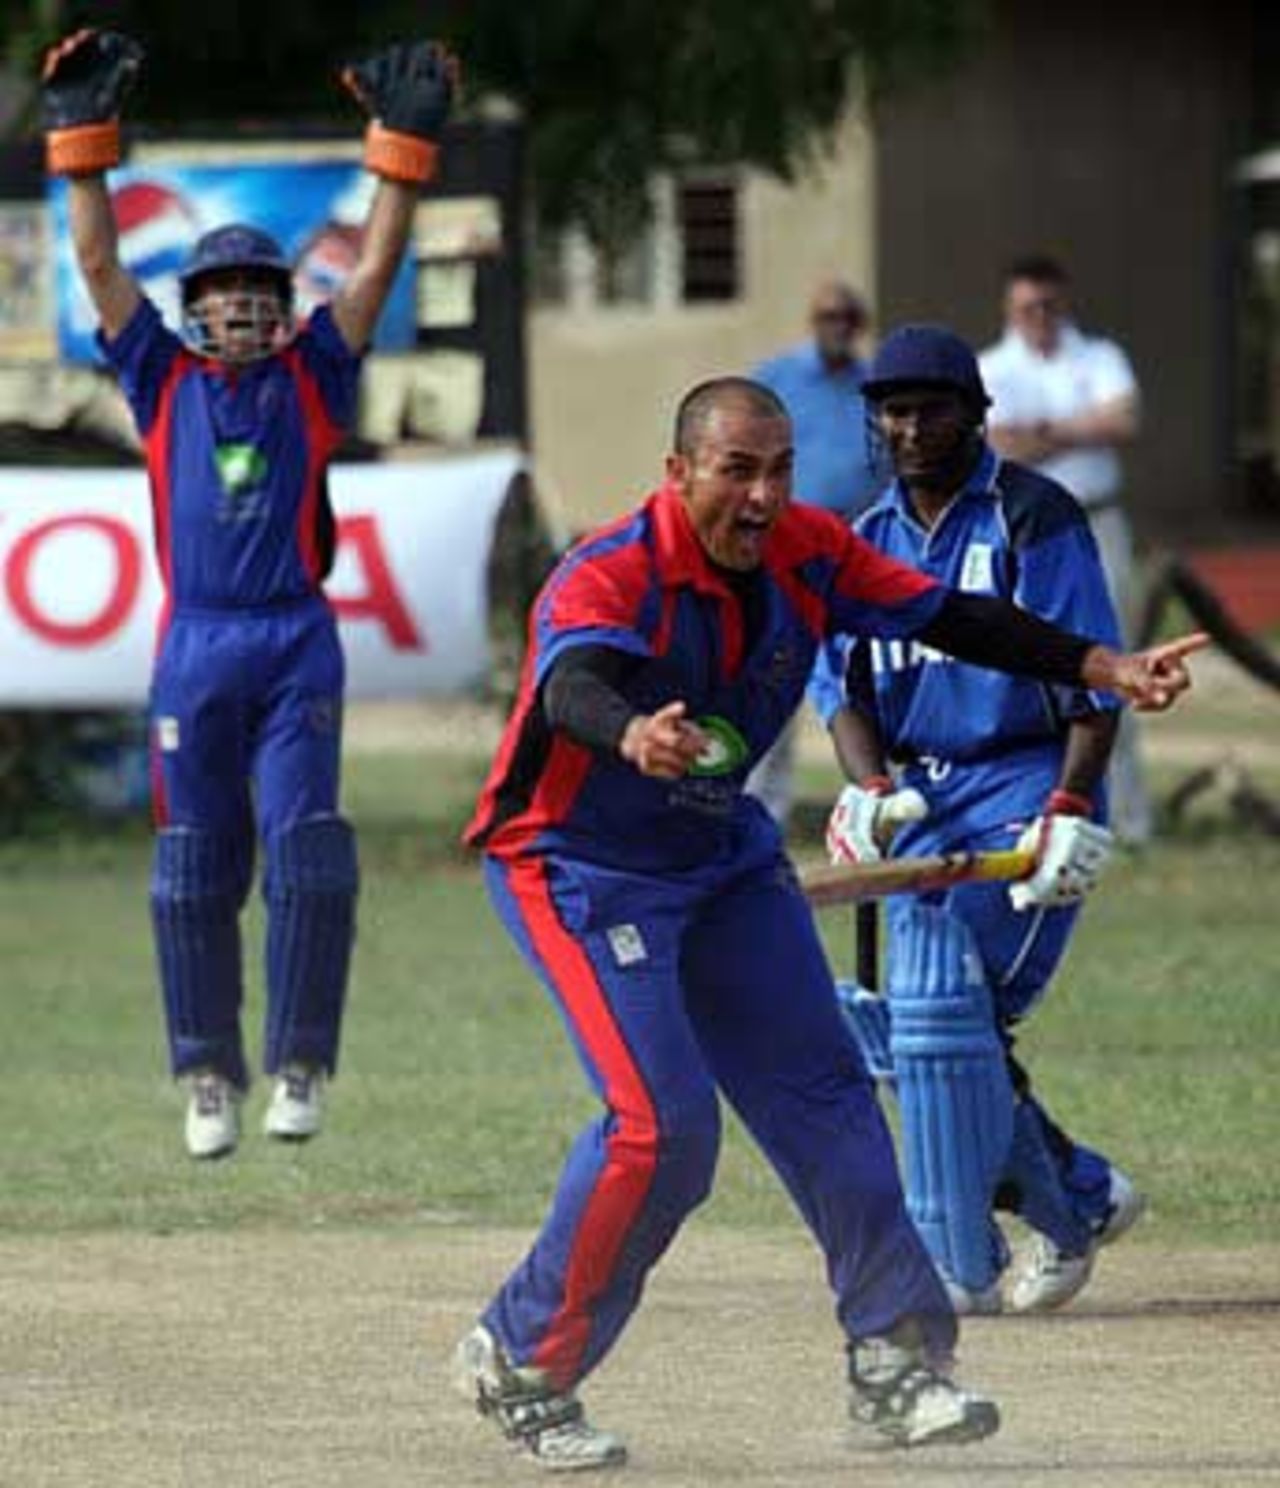 Hamid Hassan collects one of his three wickets against Italy to help Afghanistan to promotion, Afghanistan v Italy, World Cricket League Division 4, Dar Es Salaam, October 10, 2008